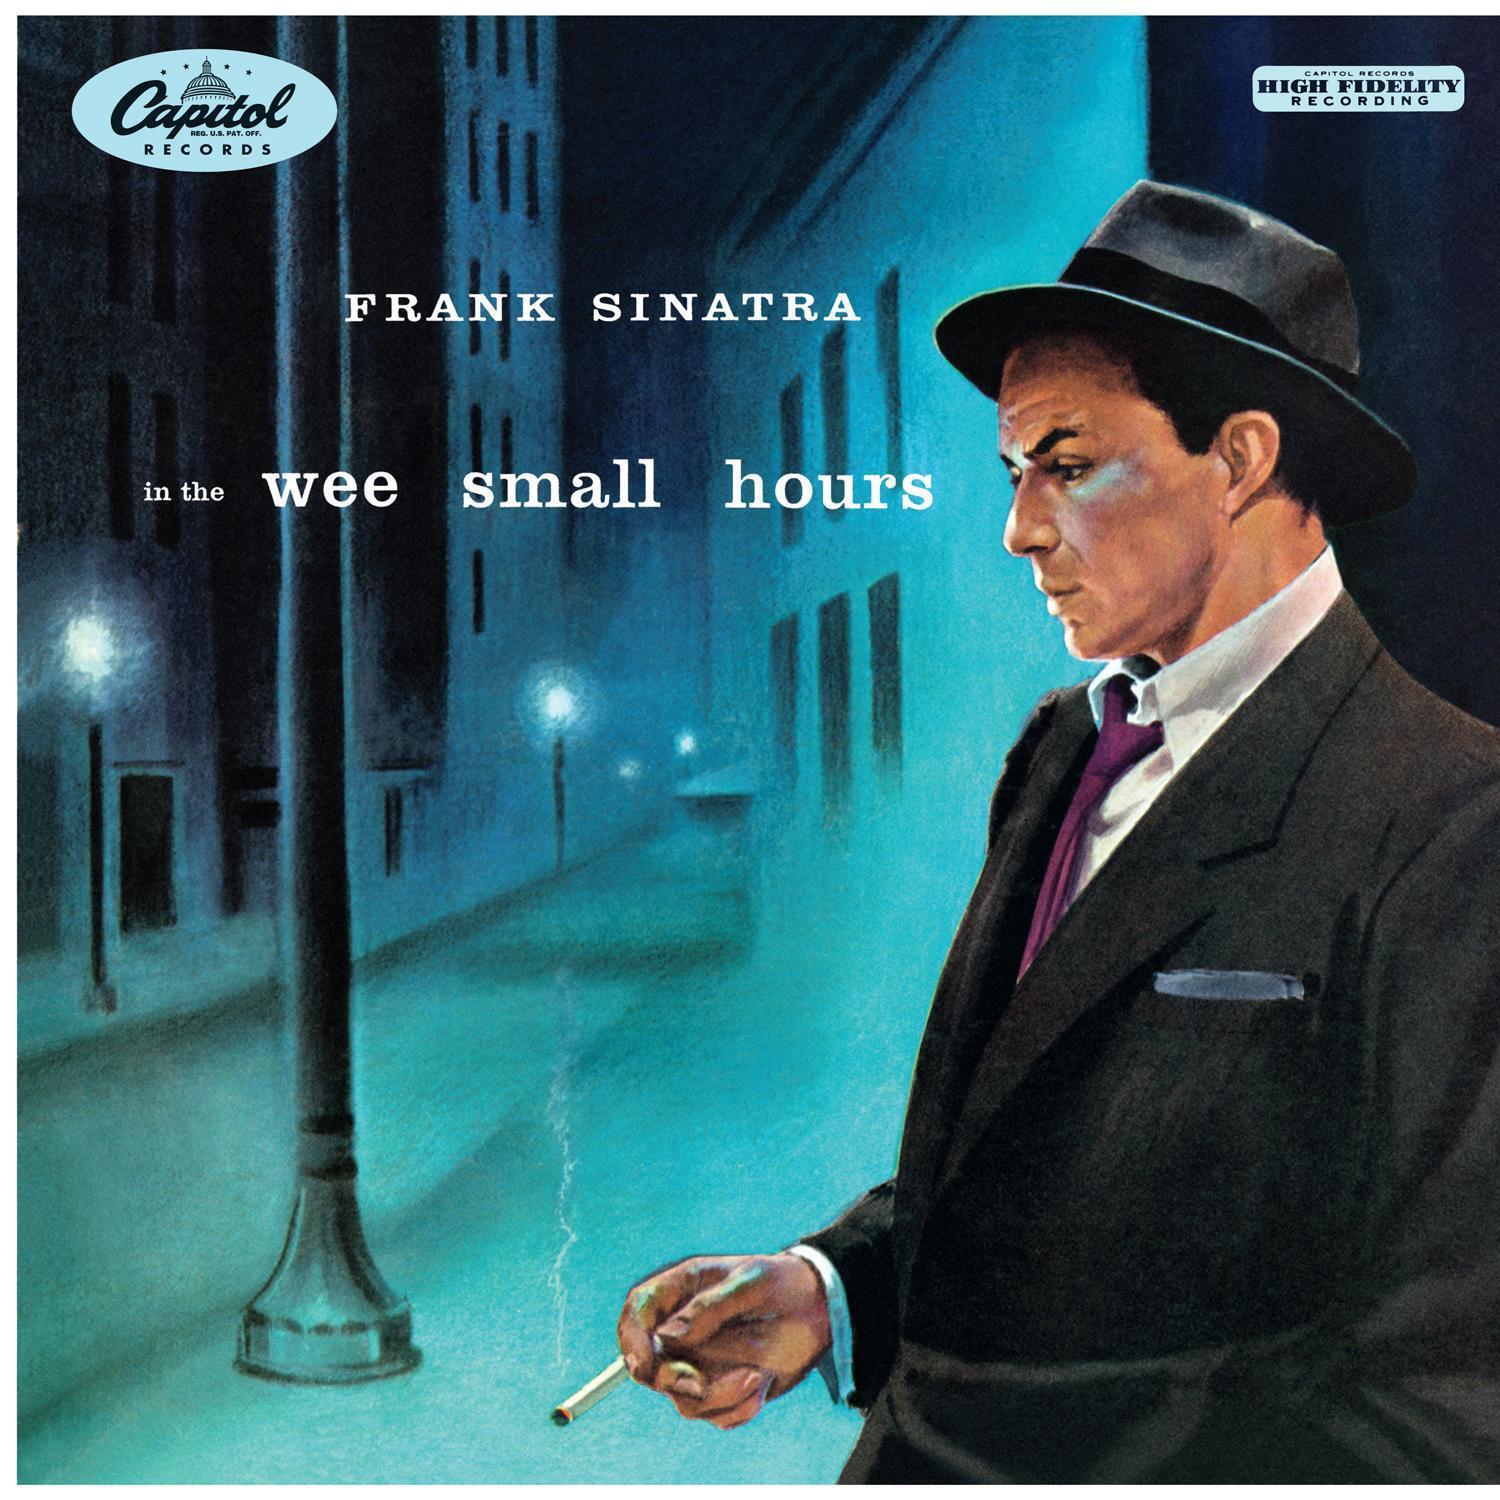 Frank Sinatra in the Wee Small Hours Poster